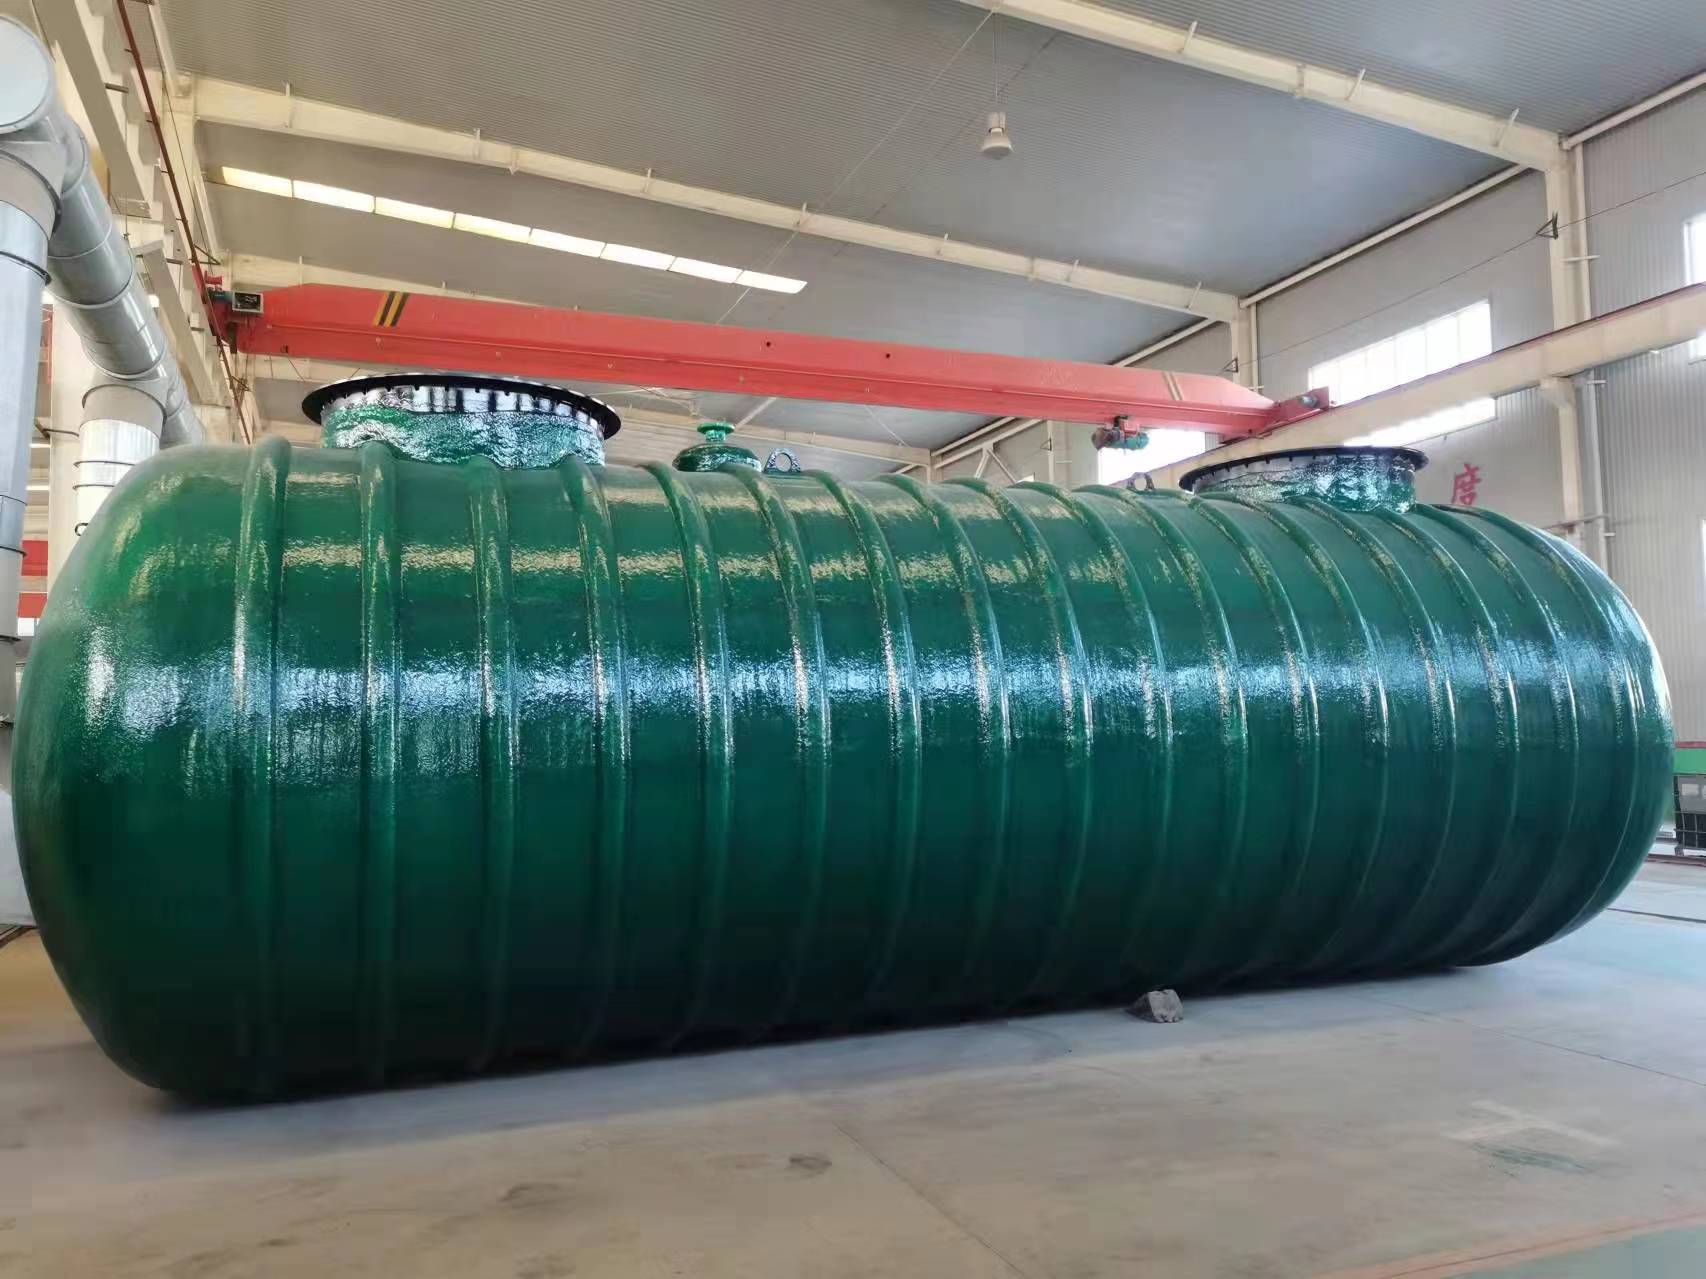 What are the international standards for double-layer underground oil tanks?